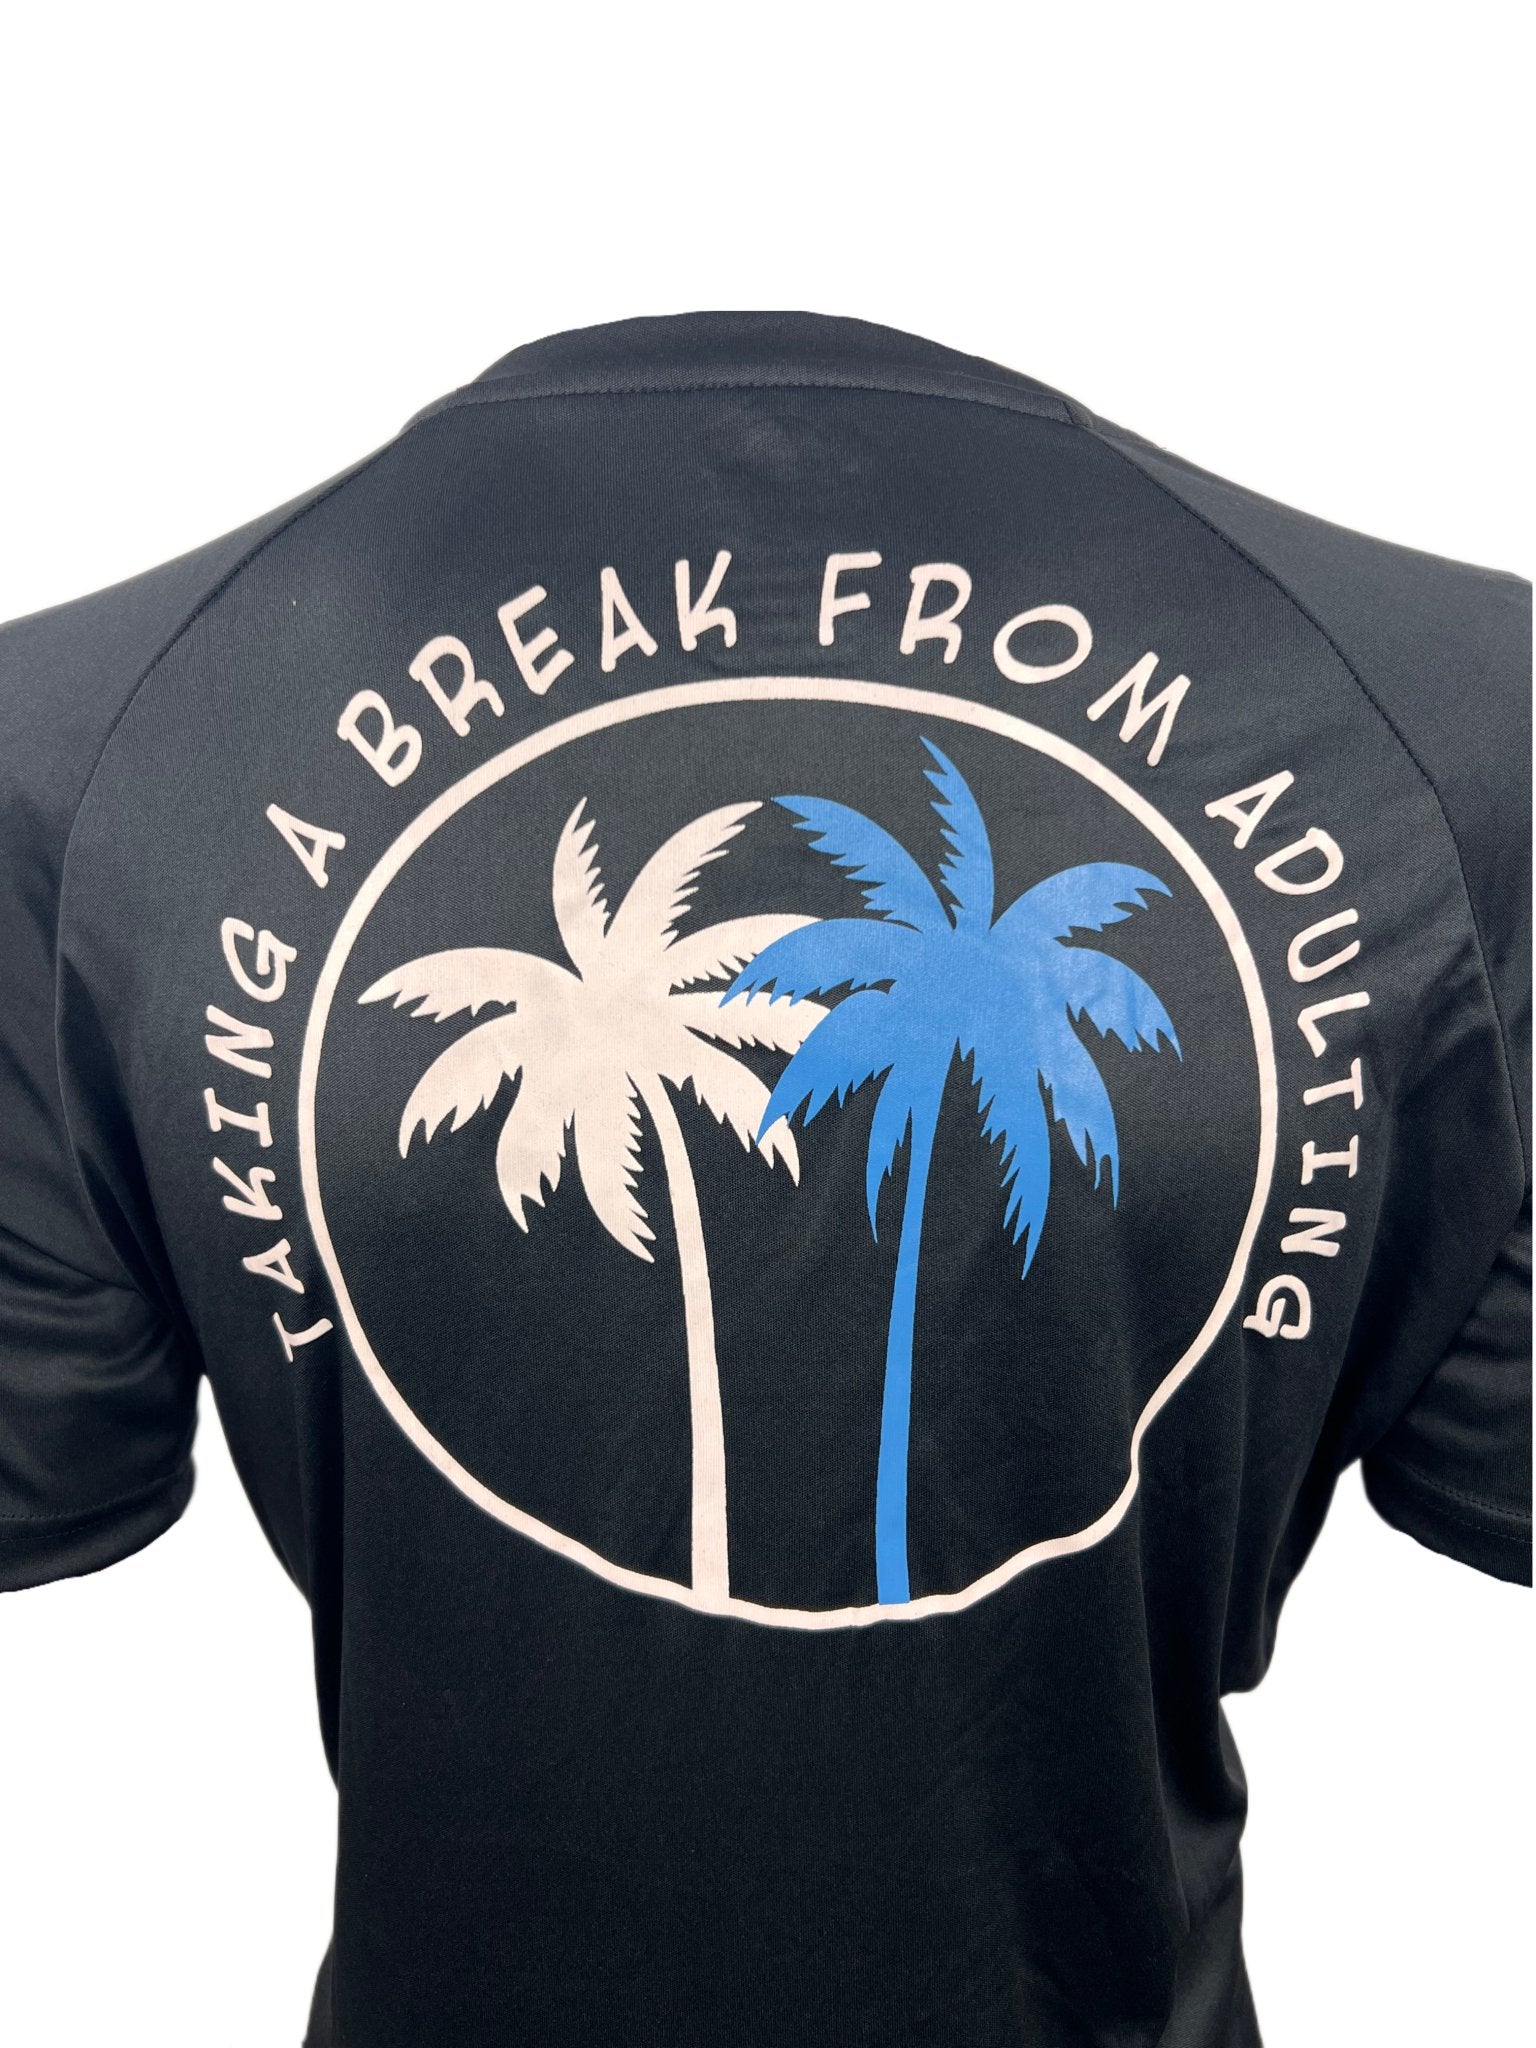 MEN’S DRY-FIT TAKING A BREAK FROM ADULTING TEE | PALM TREE MOISTURE WICKING SHIRT - BLACK | ALPHAUNLEASHED - ALPHAunleashed